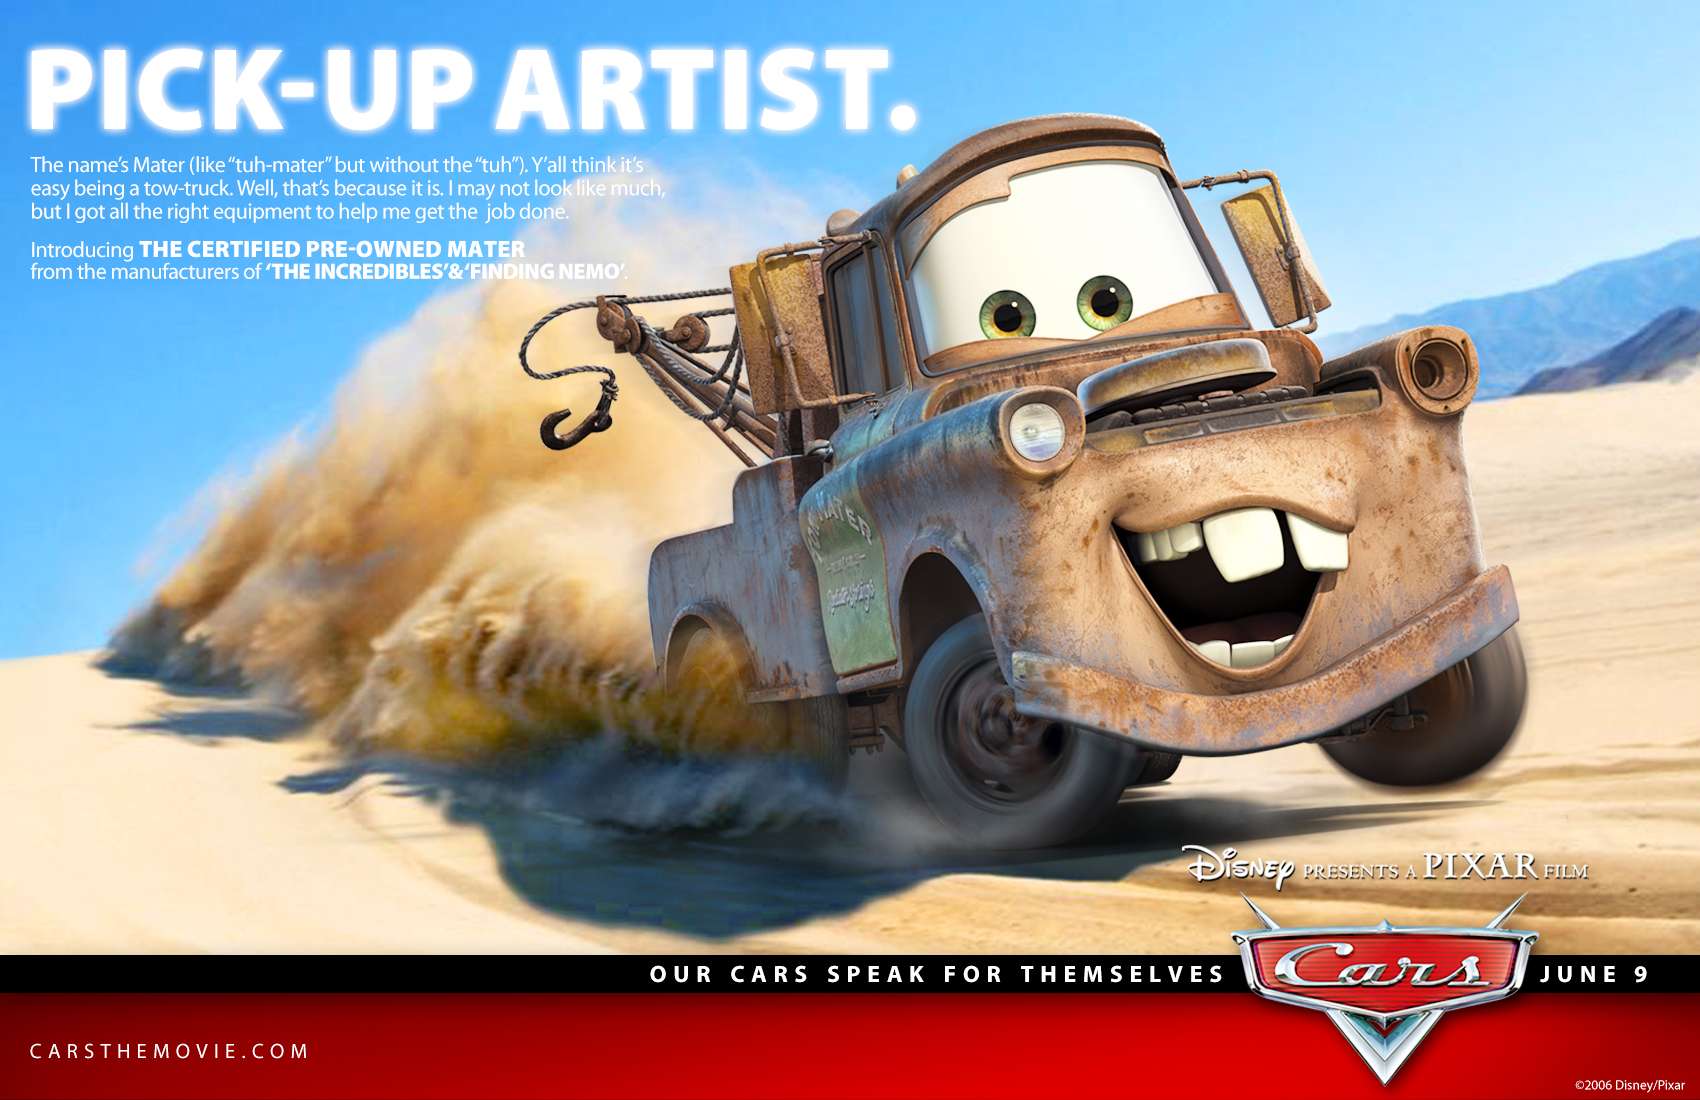 Mater - LARRY THE CABLE GUY Photo (299182) - Fanpop